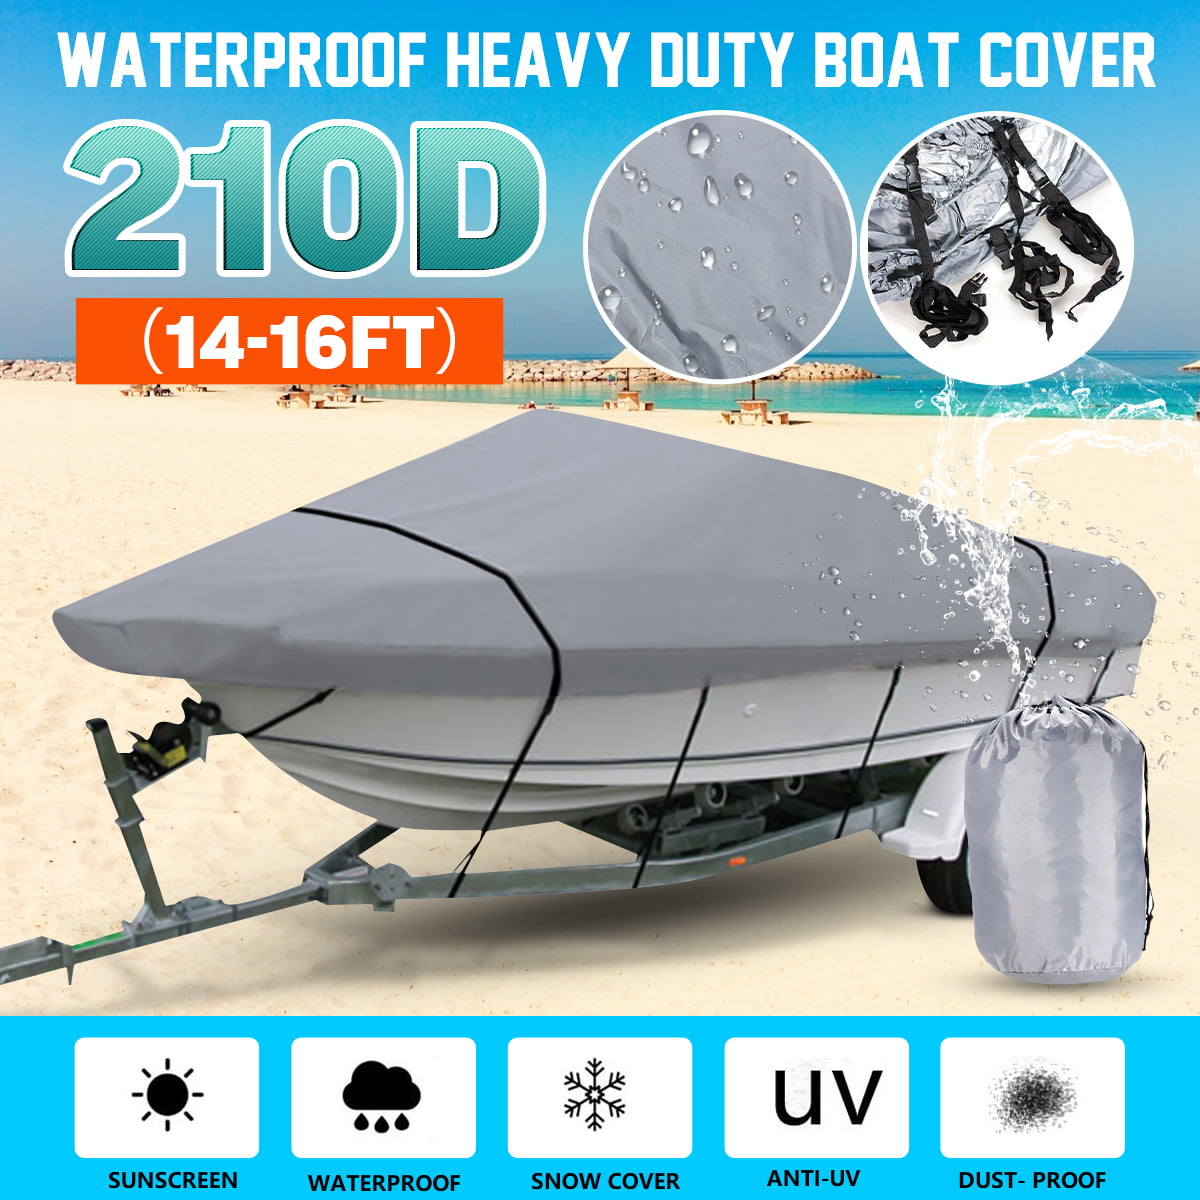 Heavy Duty 210D Oxford Sunproof Waterproof Boat Cover Protector for Small Boat pologyase 112 x 48 in Boat Cover